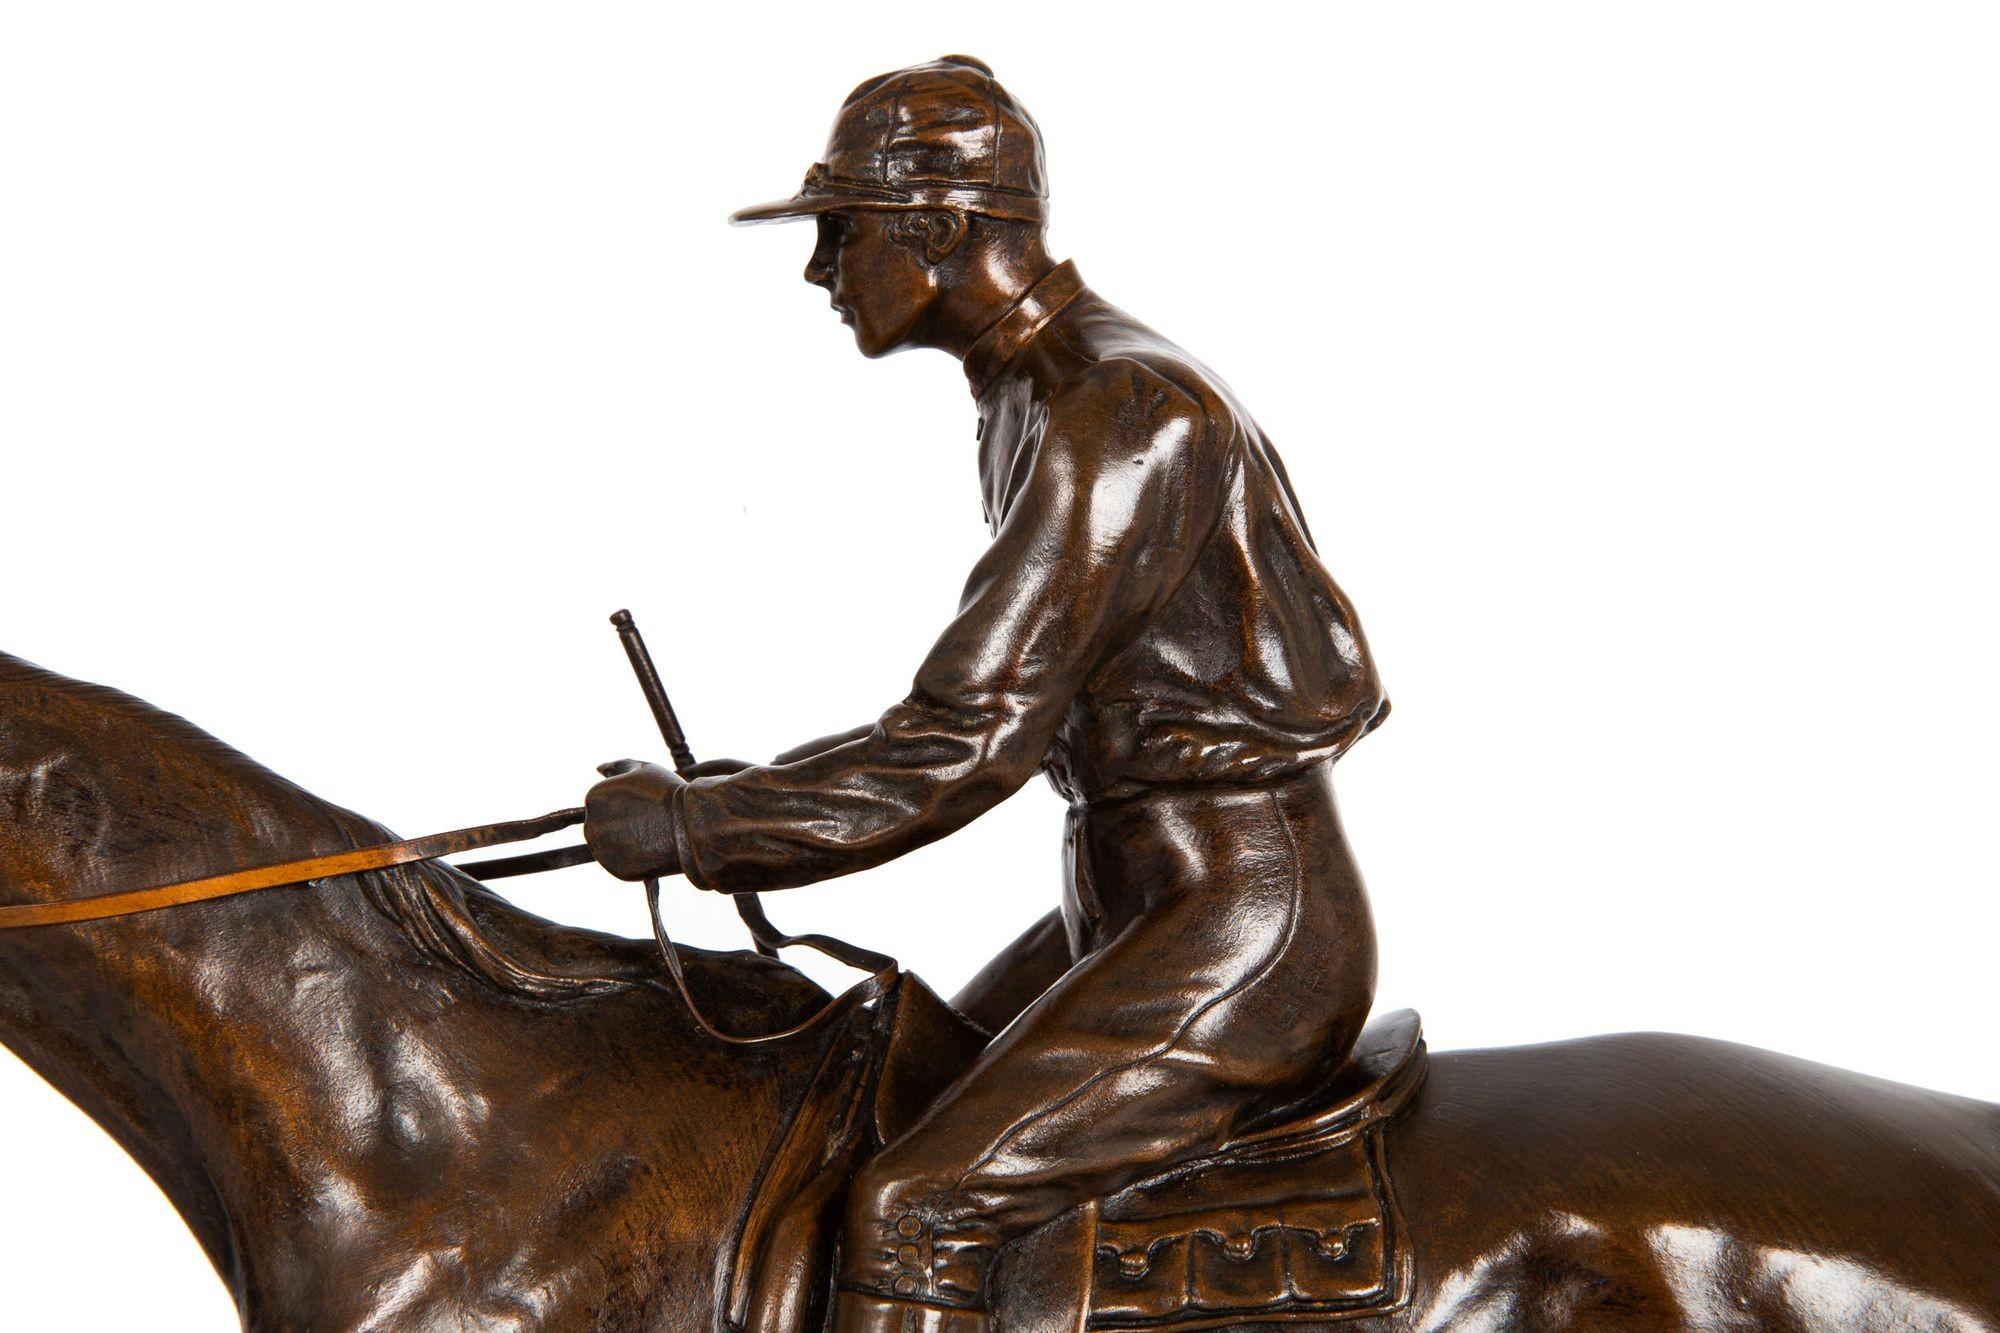 19th Century French Antique Bronze Sculpture of Jockey on Race Horse by H.R. de Vains For Sale